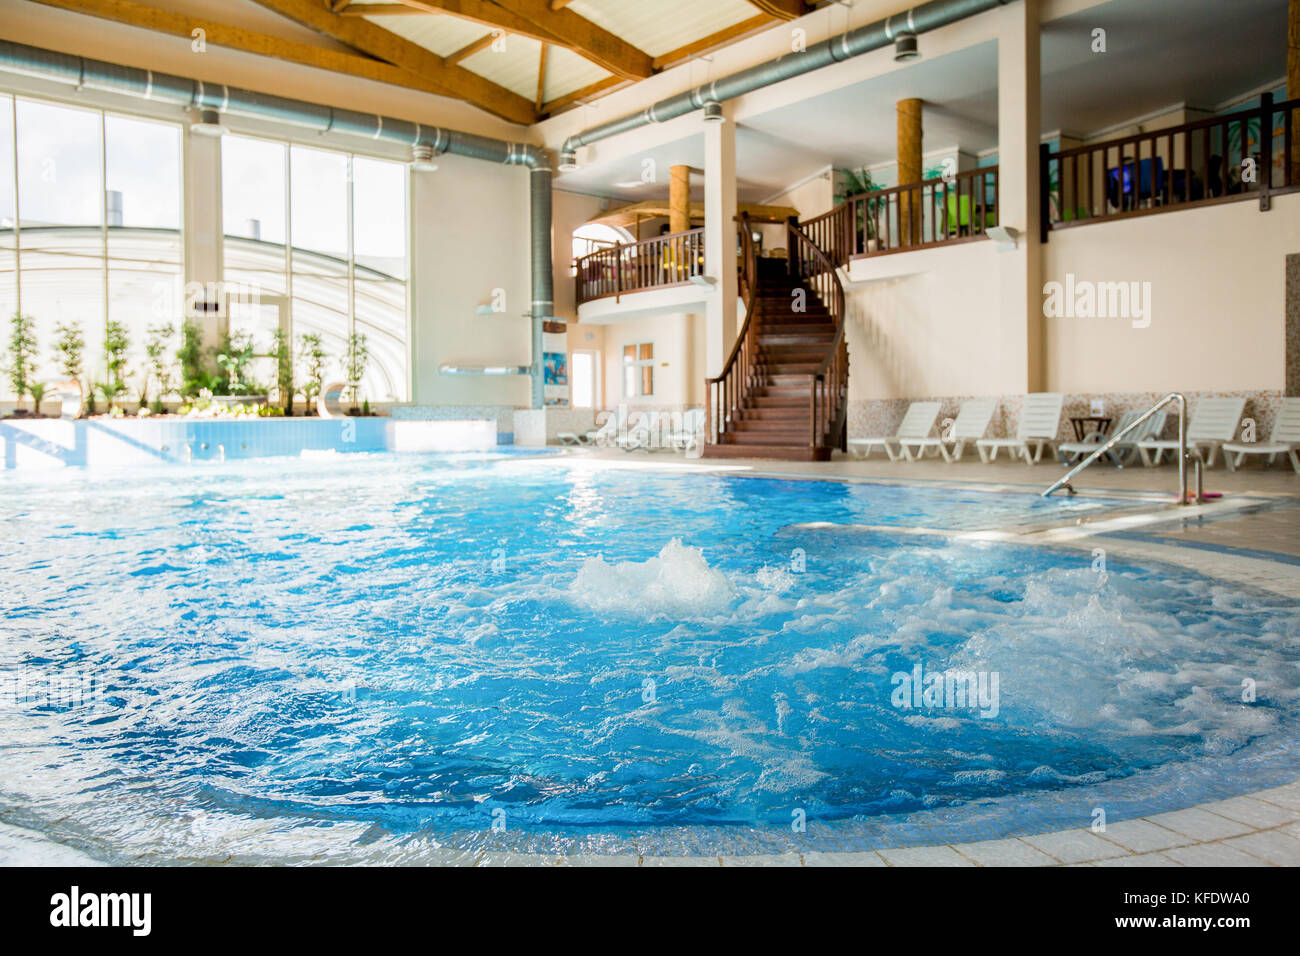 Interior of contemporary dayspa resort with whirlpool full of warm splashing water in the center Stock Photo